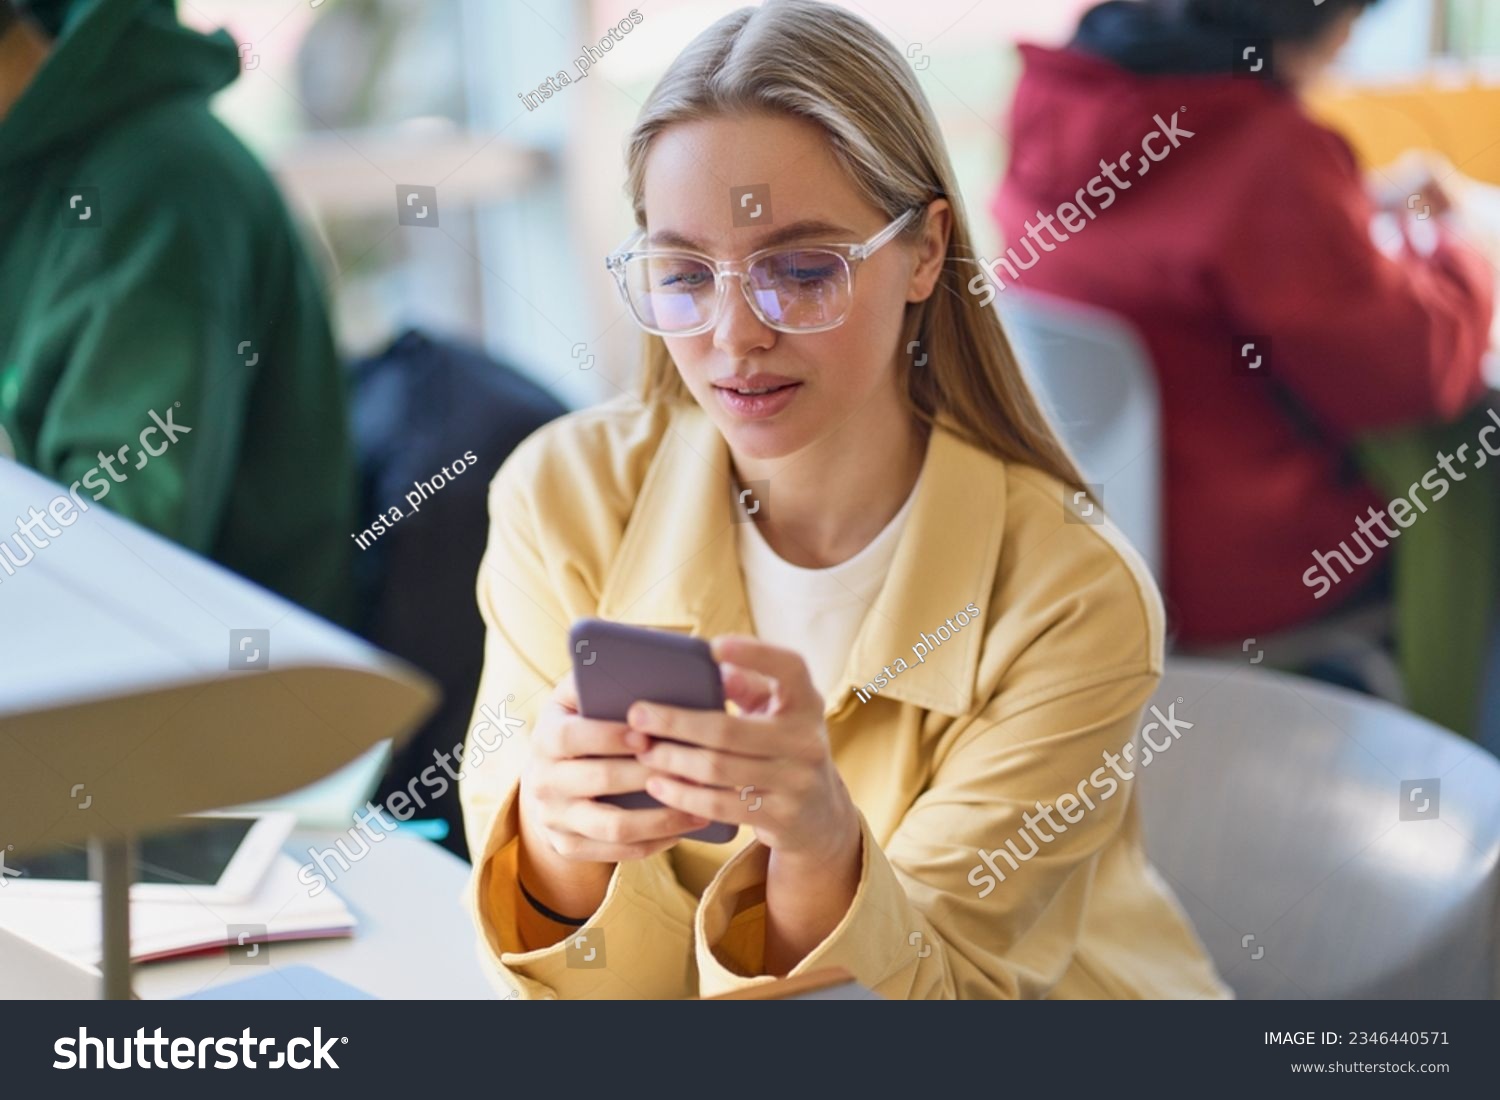 Girl student using mobile phone looking at smartphone sitting at desk in university college campus classroom. Young blonde woman holding cellphone modern tech in university advertising apps. #2346440571